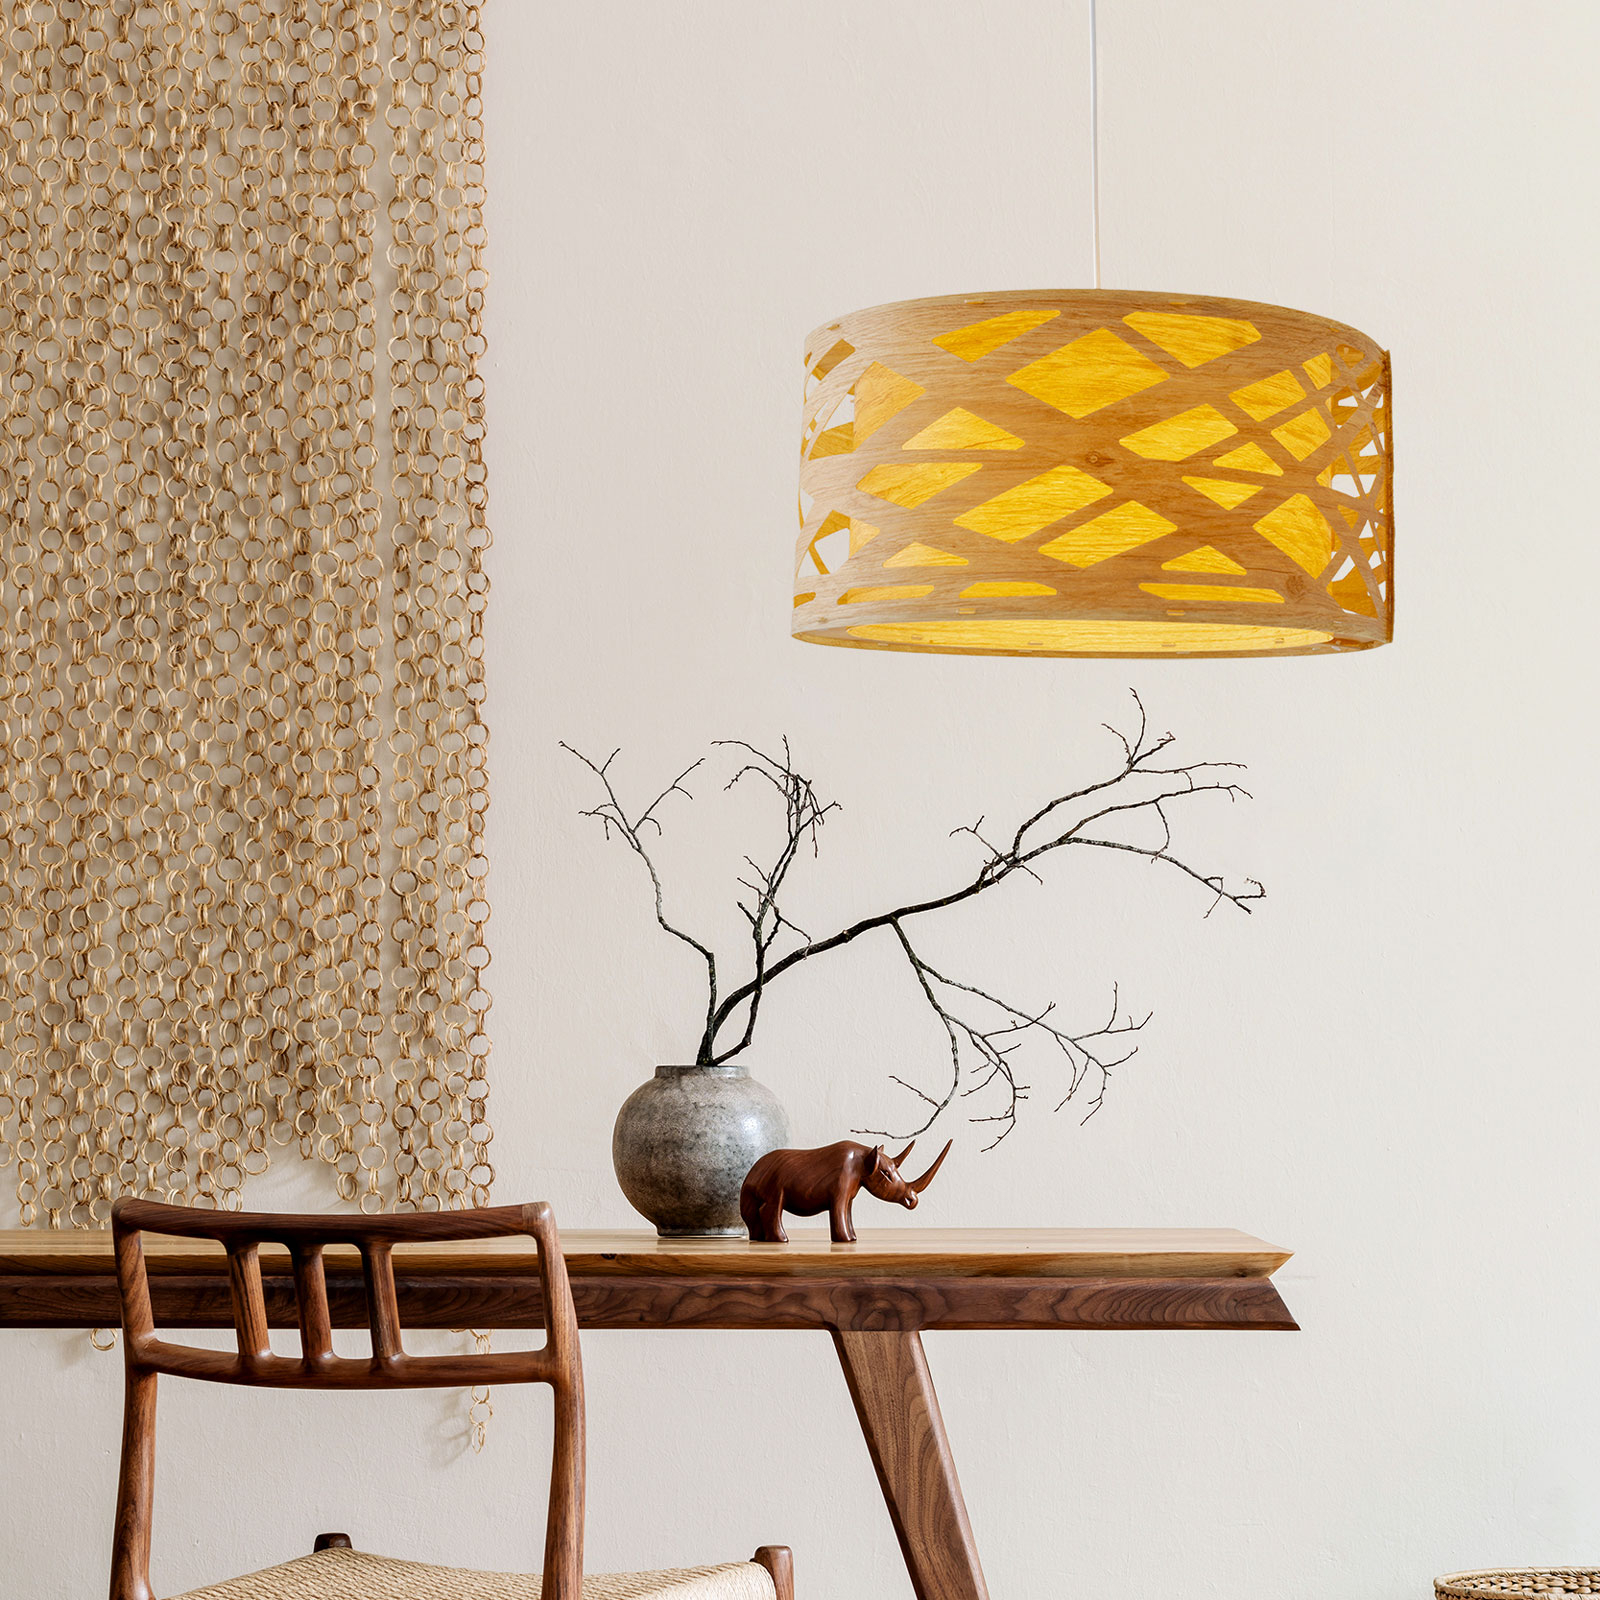 Finja hanging light, lampshade in a bamboo look